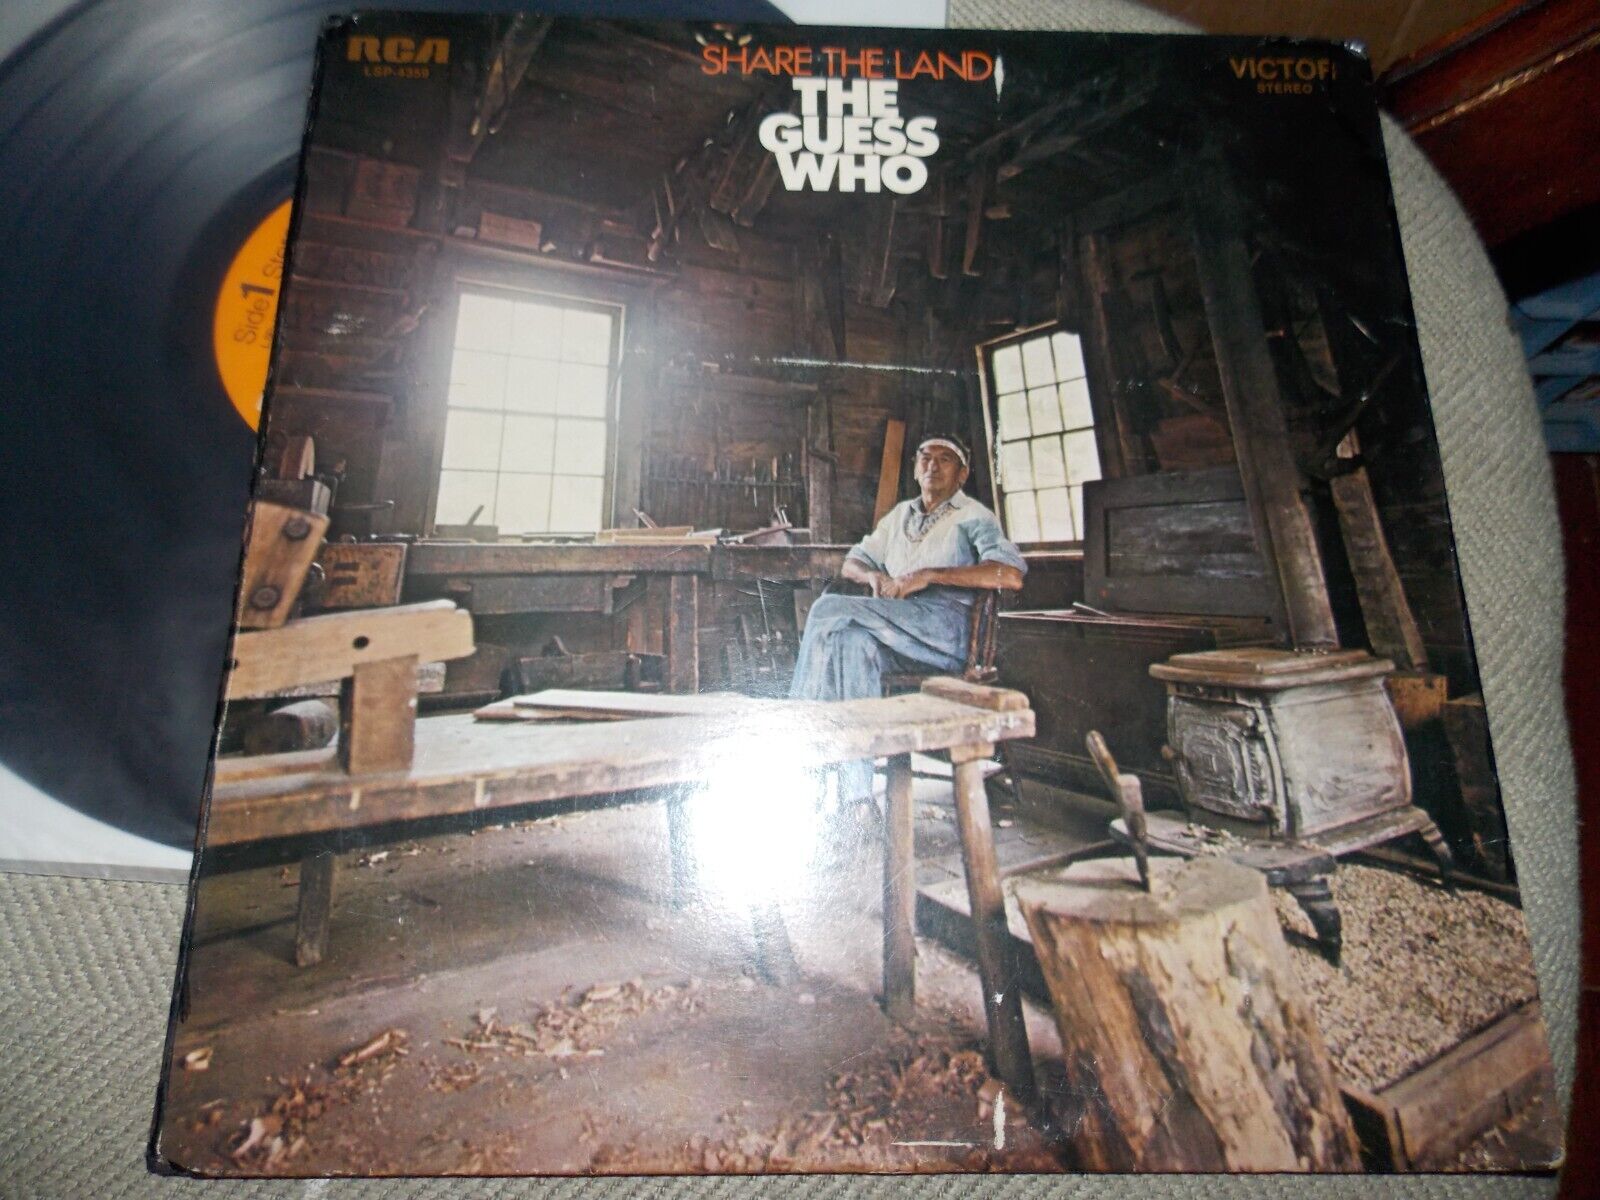 THE GUESS WHO SHARE THE LAND LSP 4359 VG+VG+  1970